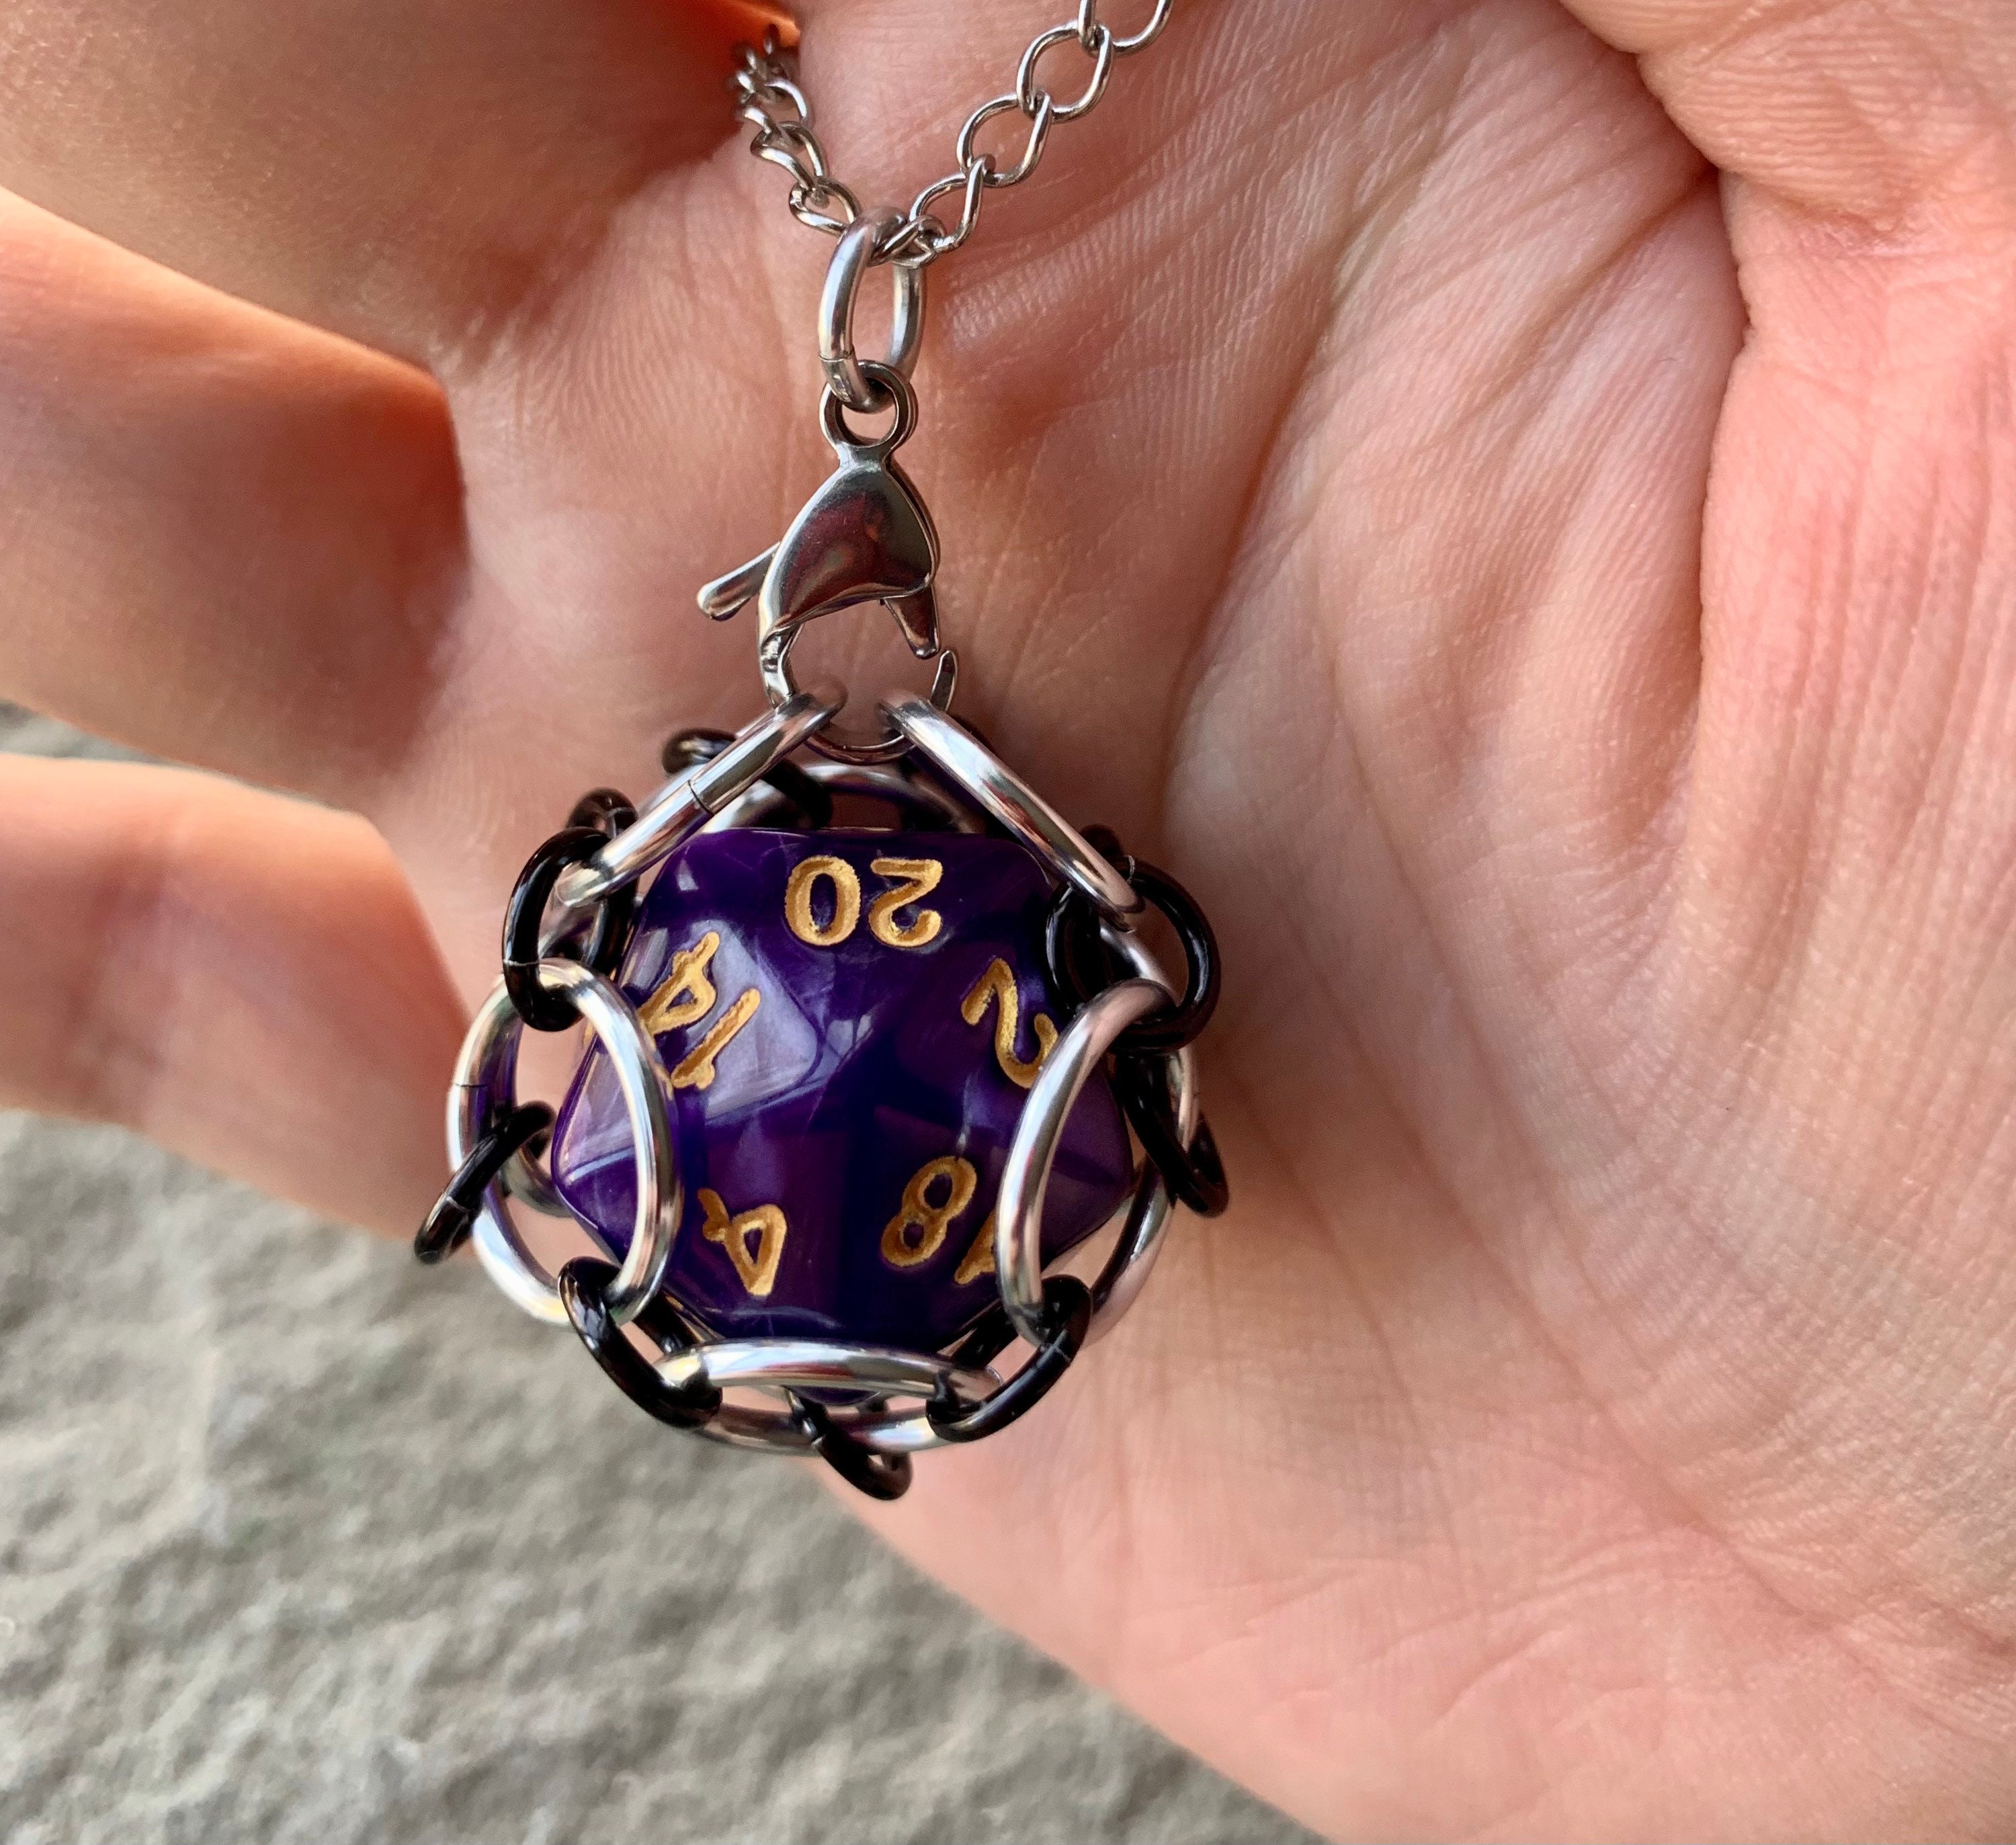 Removable Geometric D20 Dice Holder Necklace